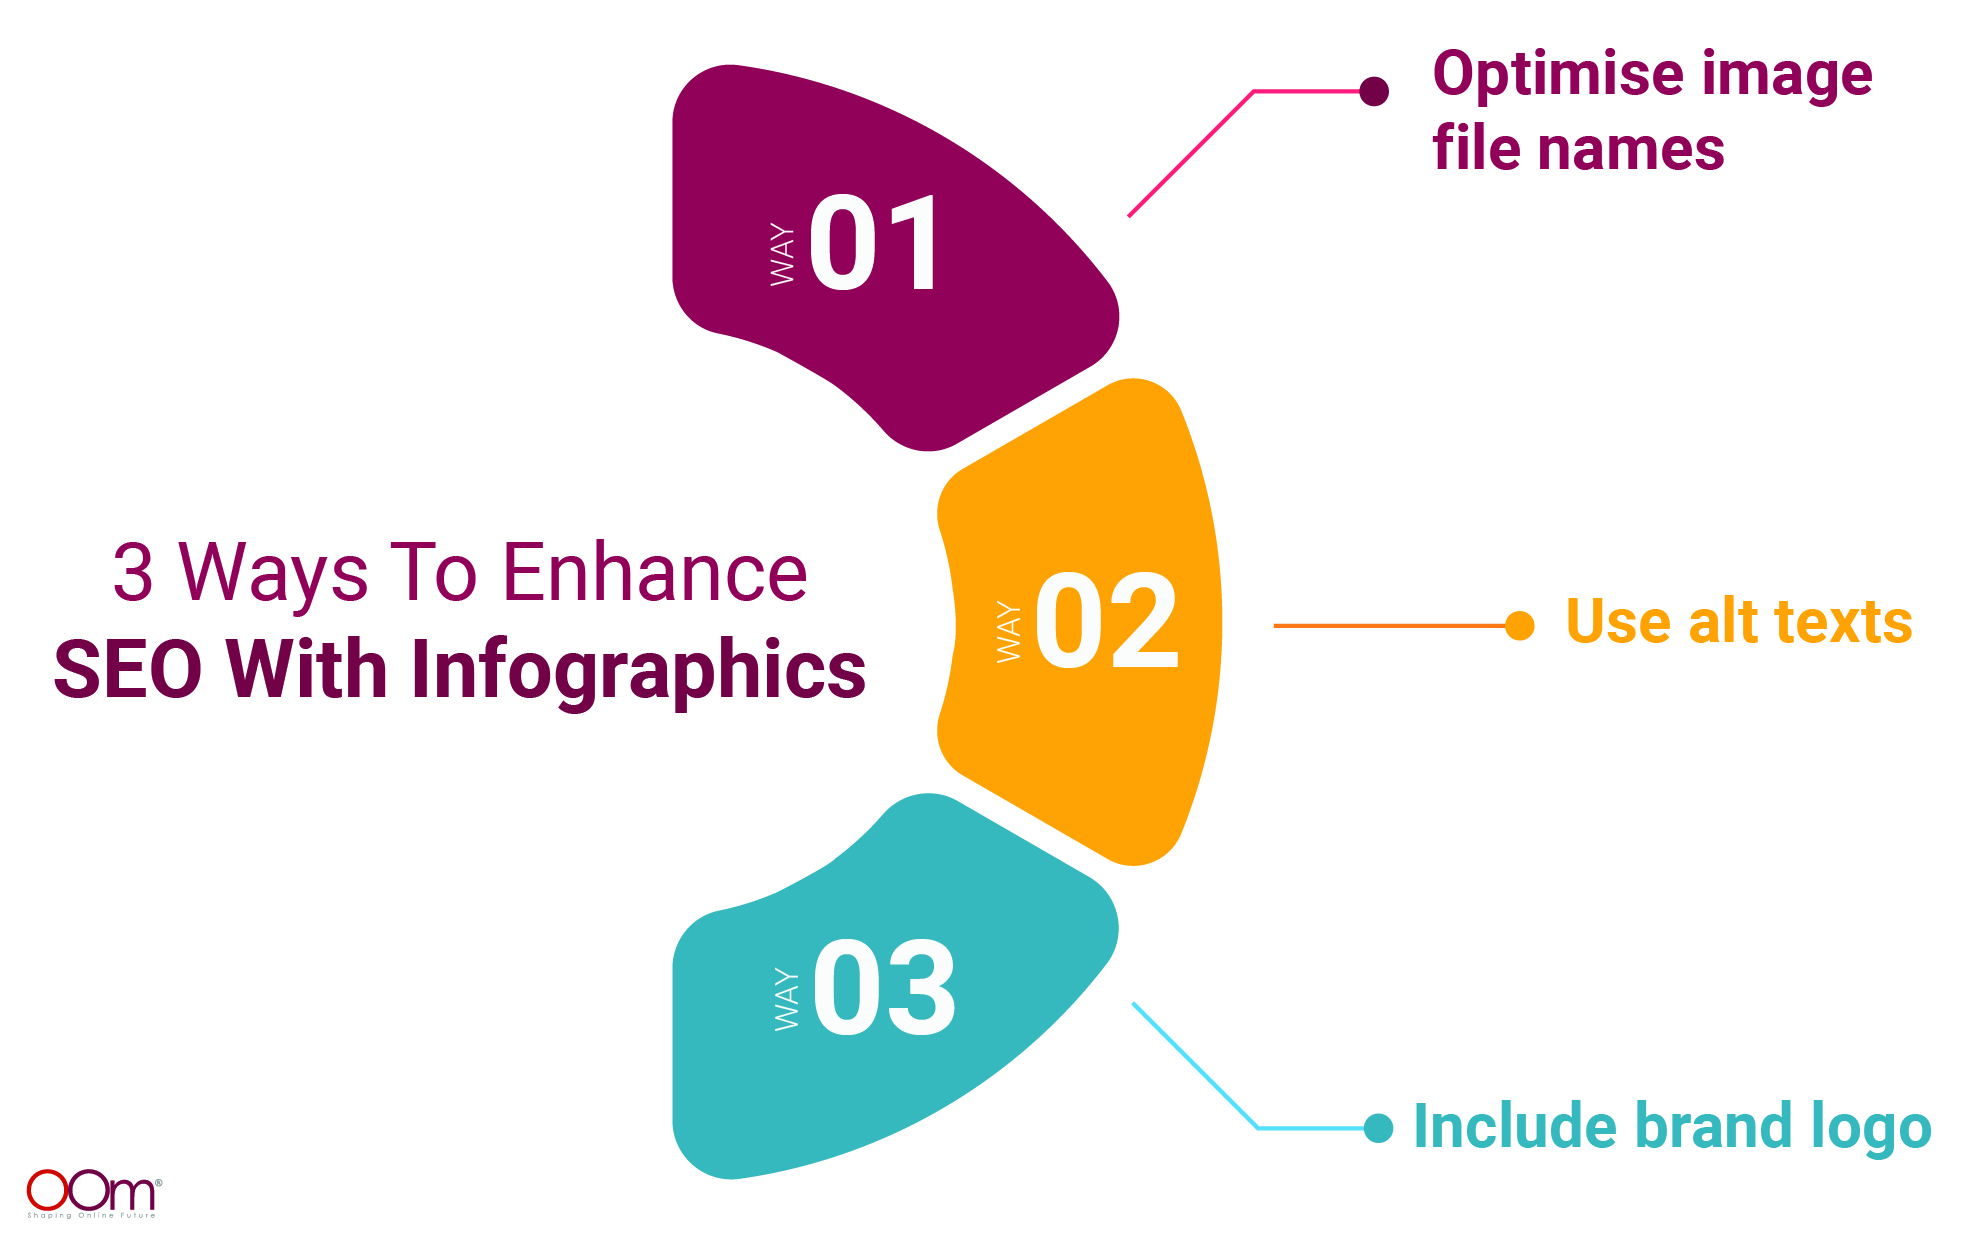 3 ways to enhance SEO with Infographics